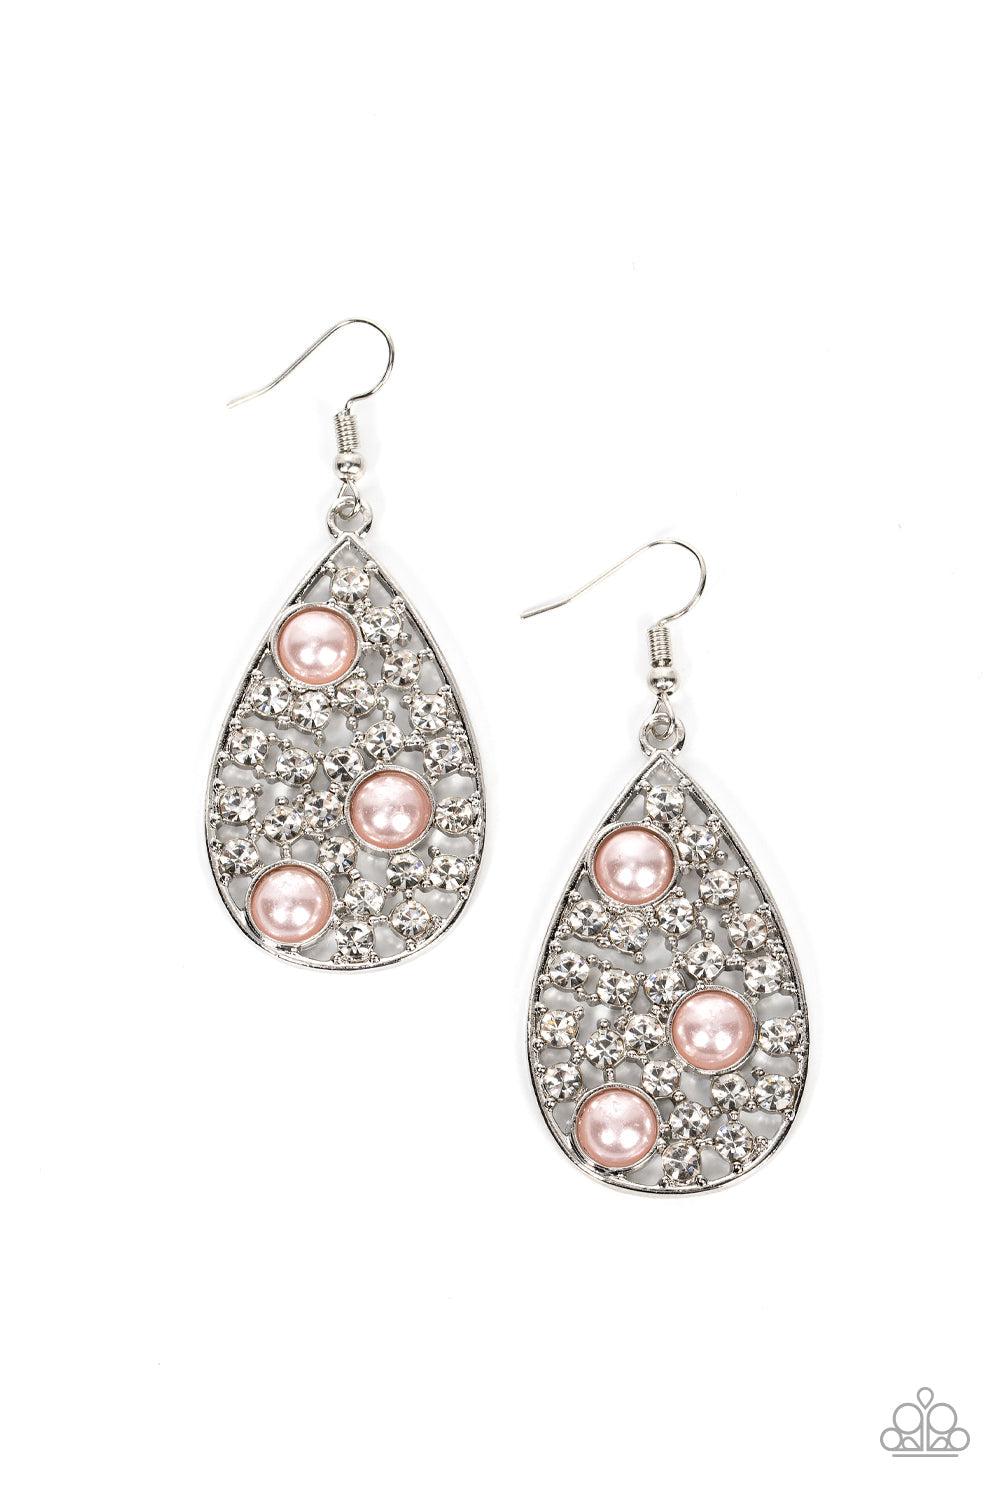 Bauble Burst Pink Pearl Earrings - Paparazzi Accessories- lightbox - CarasShop.com - $5 Jewelry by Cara Jewels